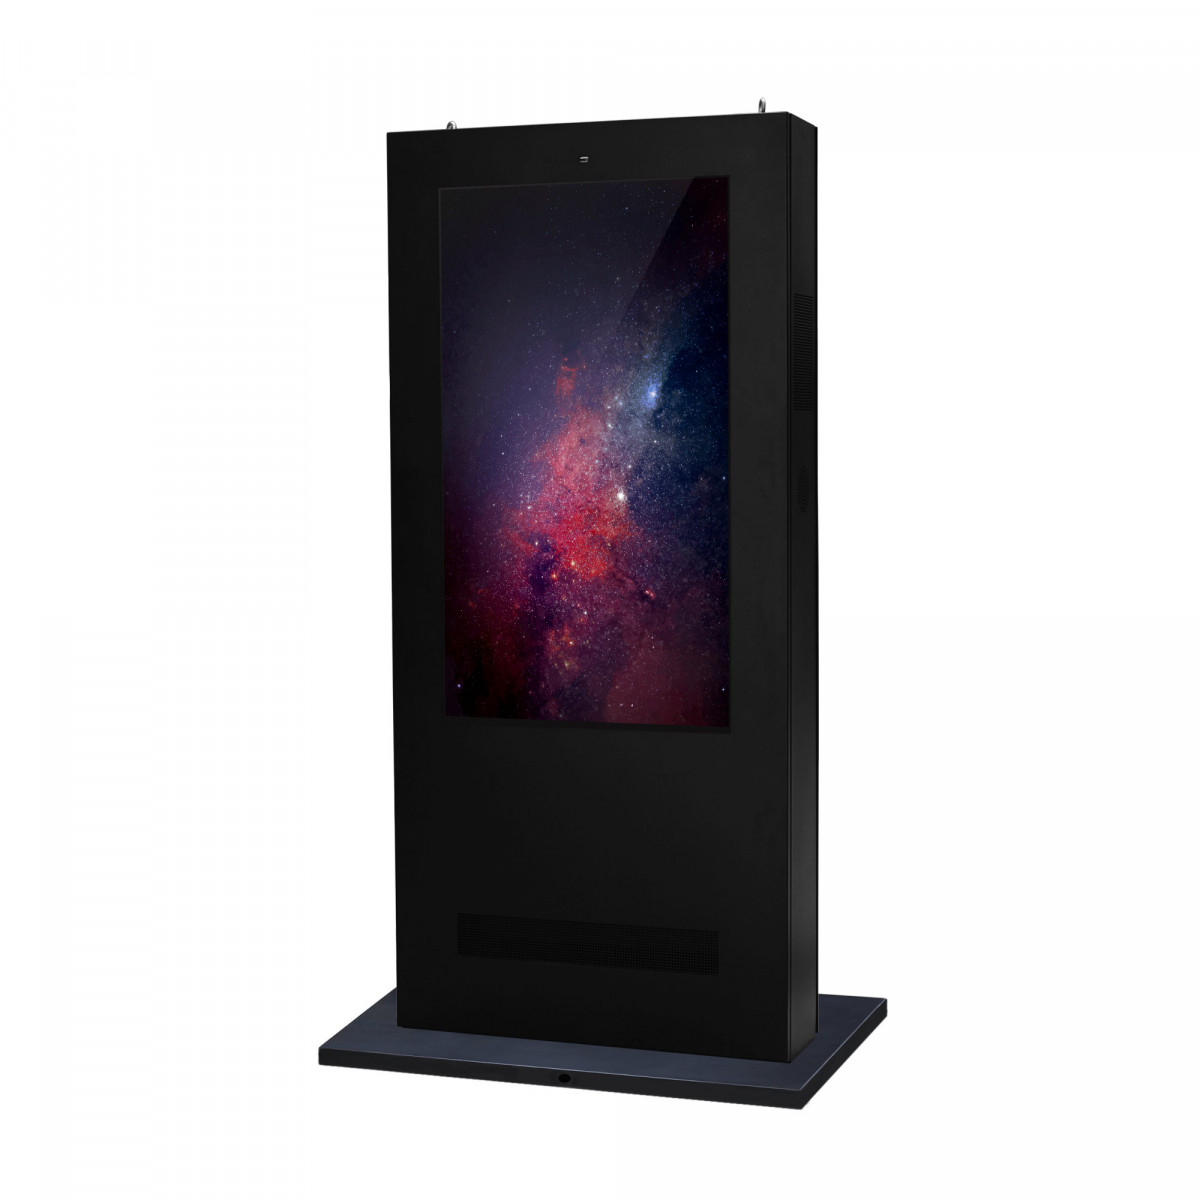 Outdoor Digital Signage Infostele LCD 55" doppelseitig Android digital signage